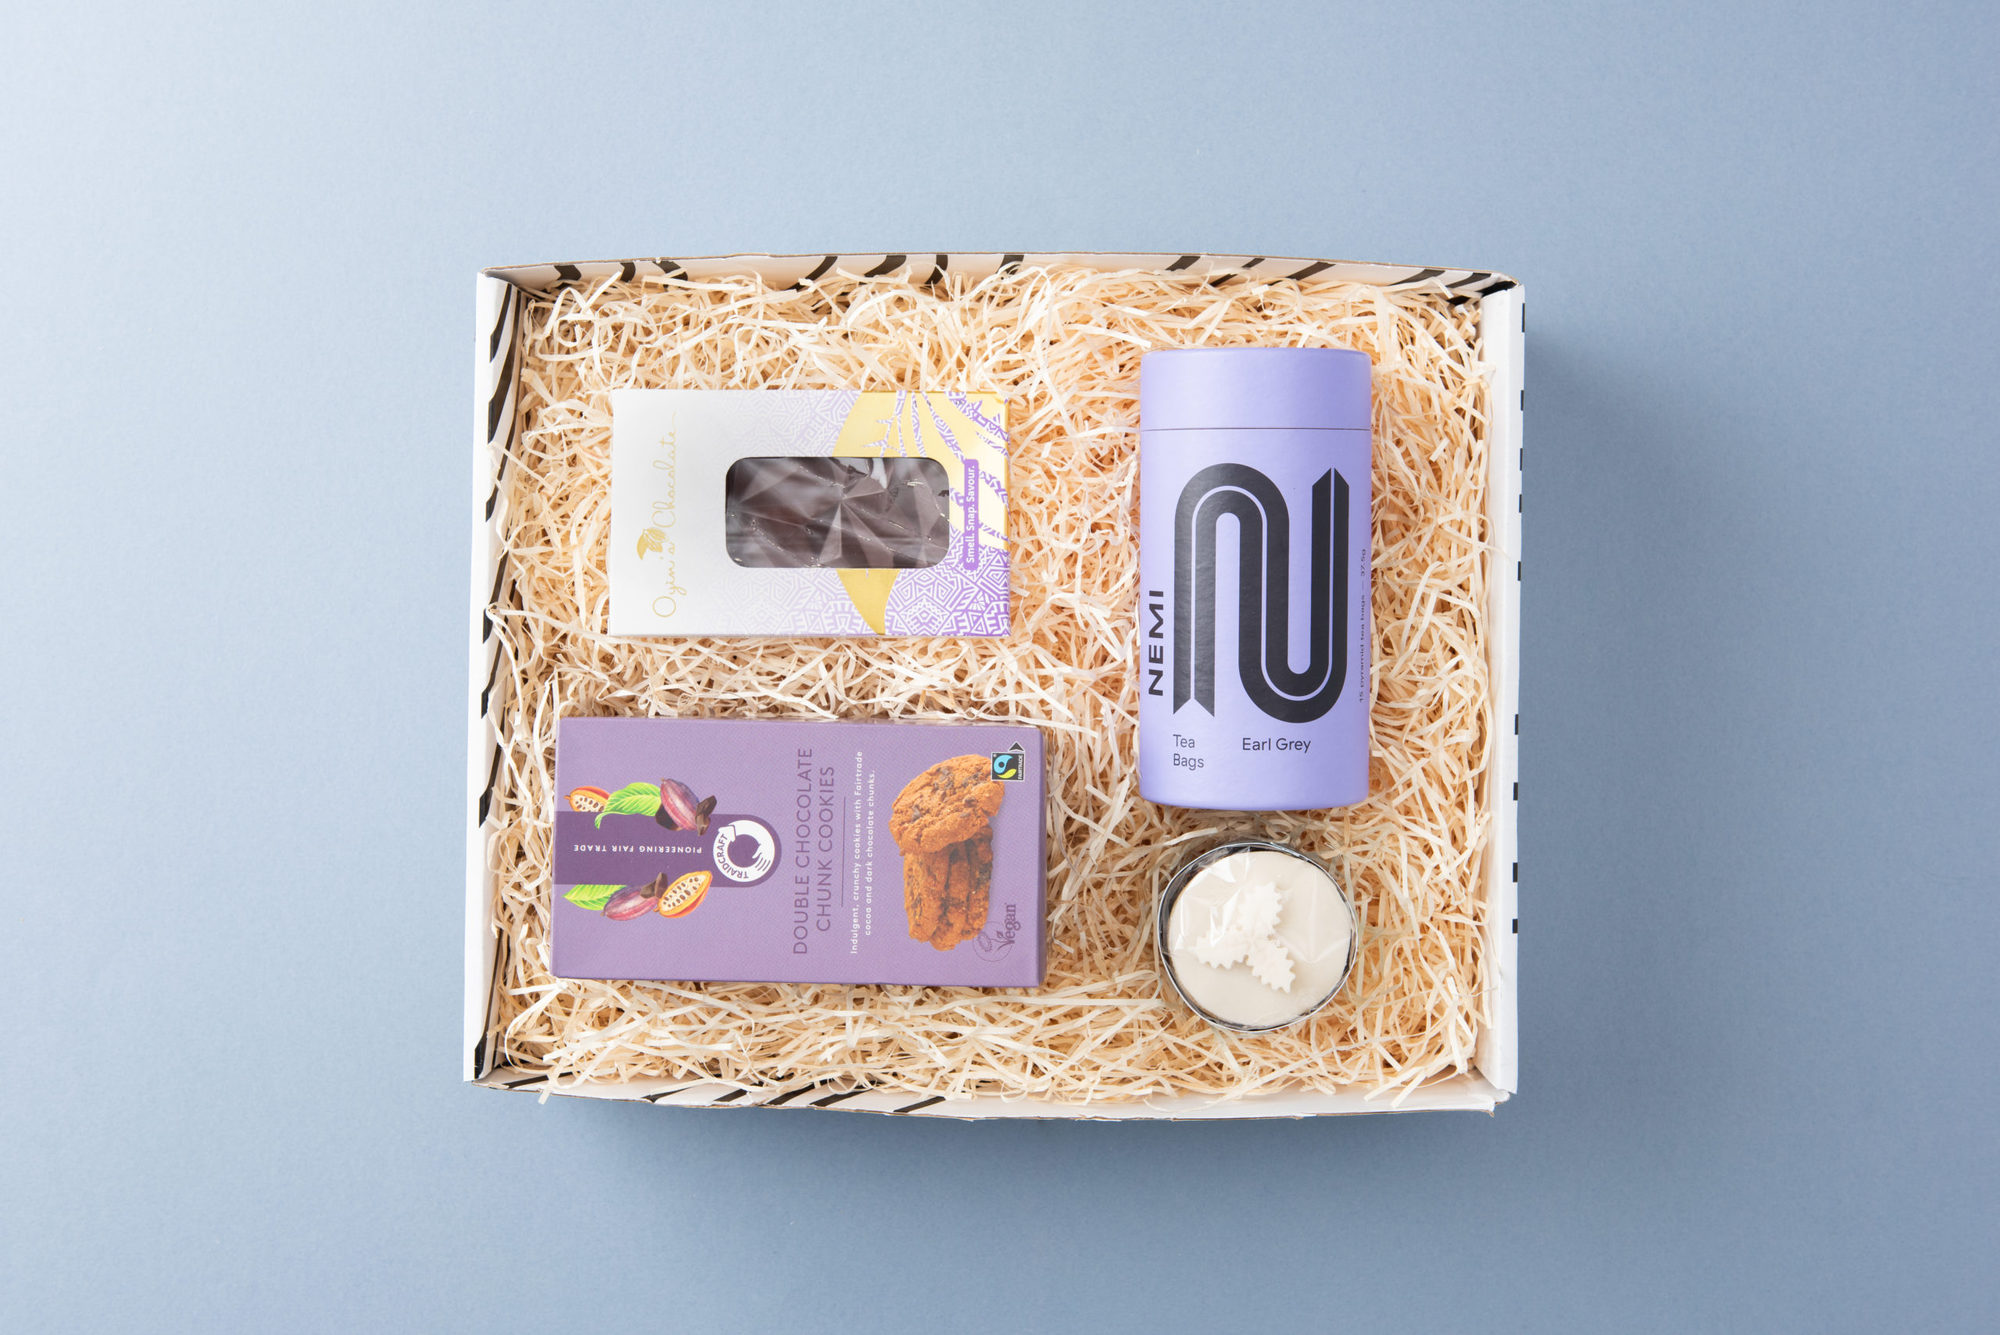 The Afternoon Nibbles Gift Box